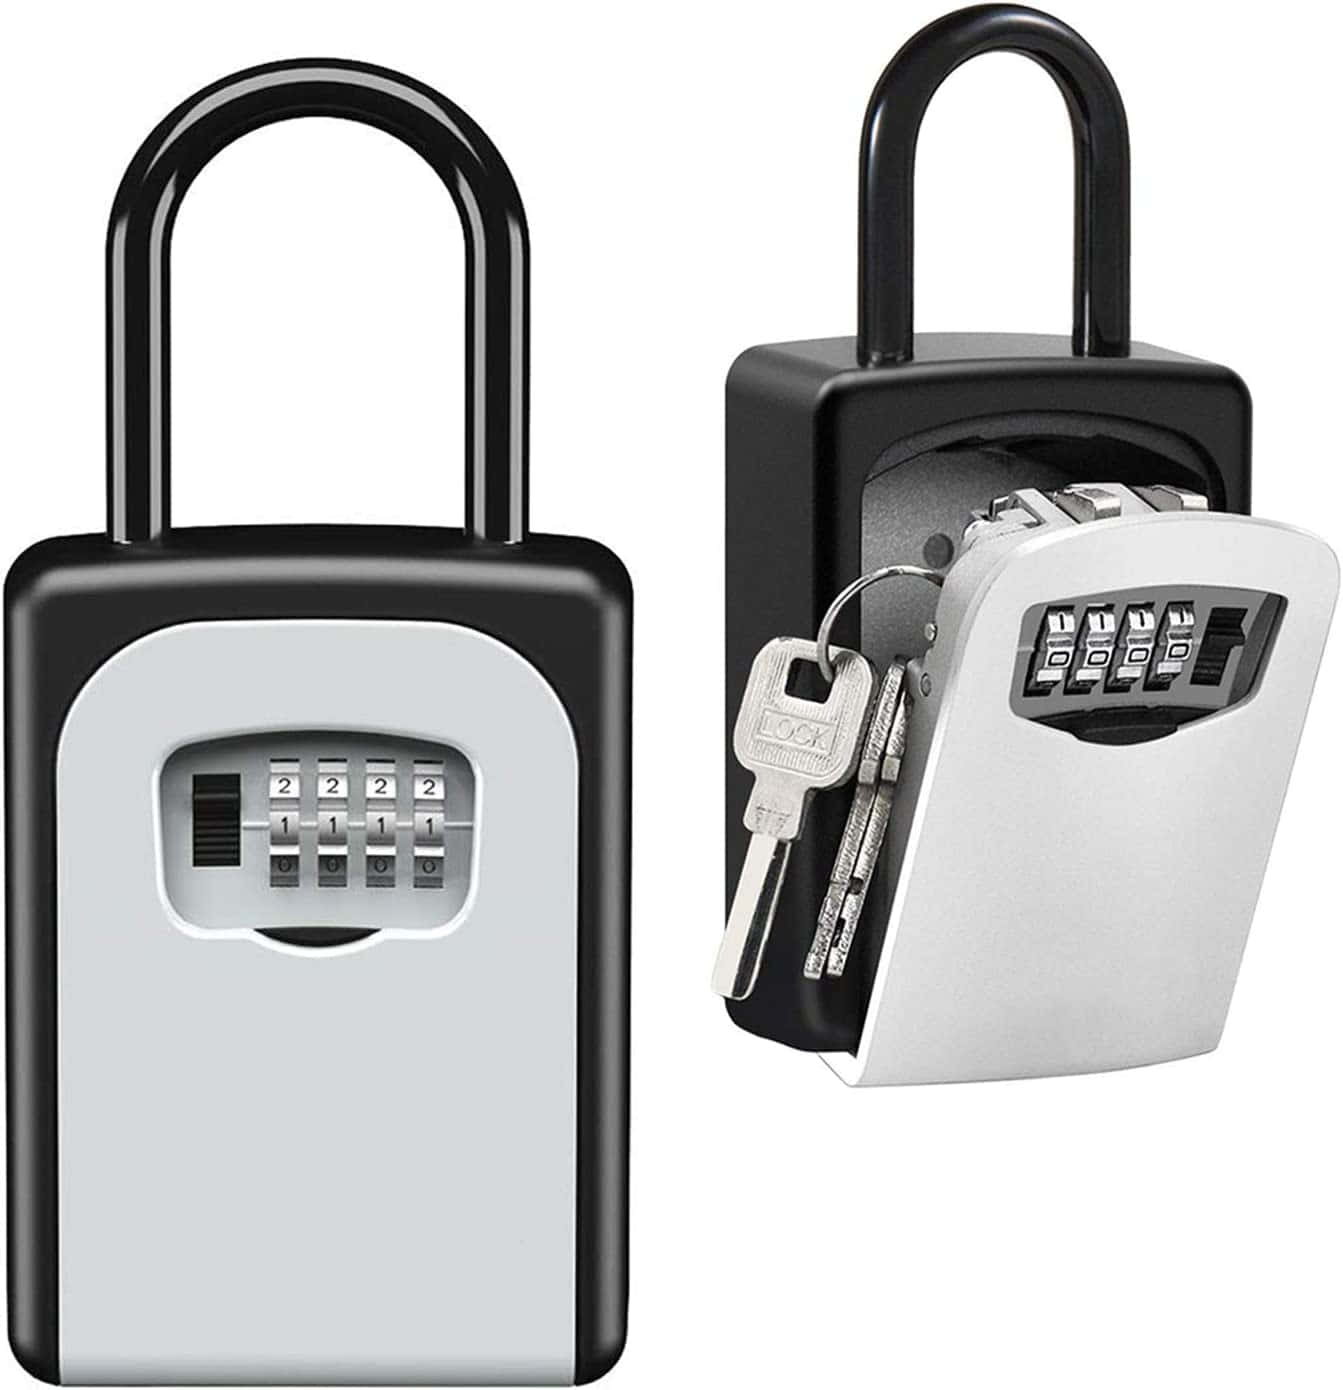 A Black And White Lock Box With Keys